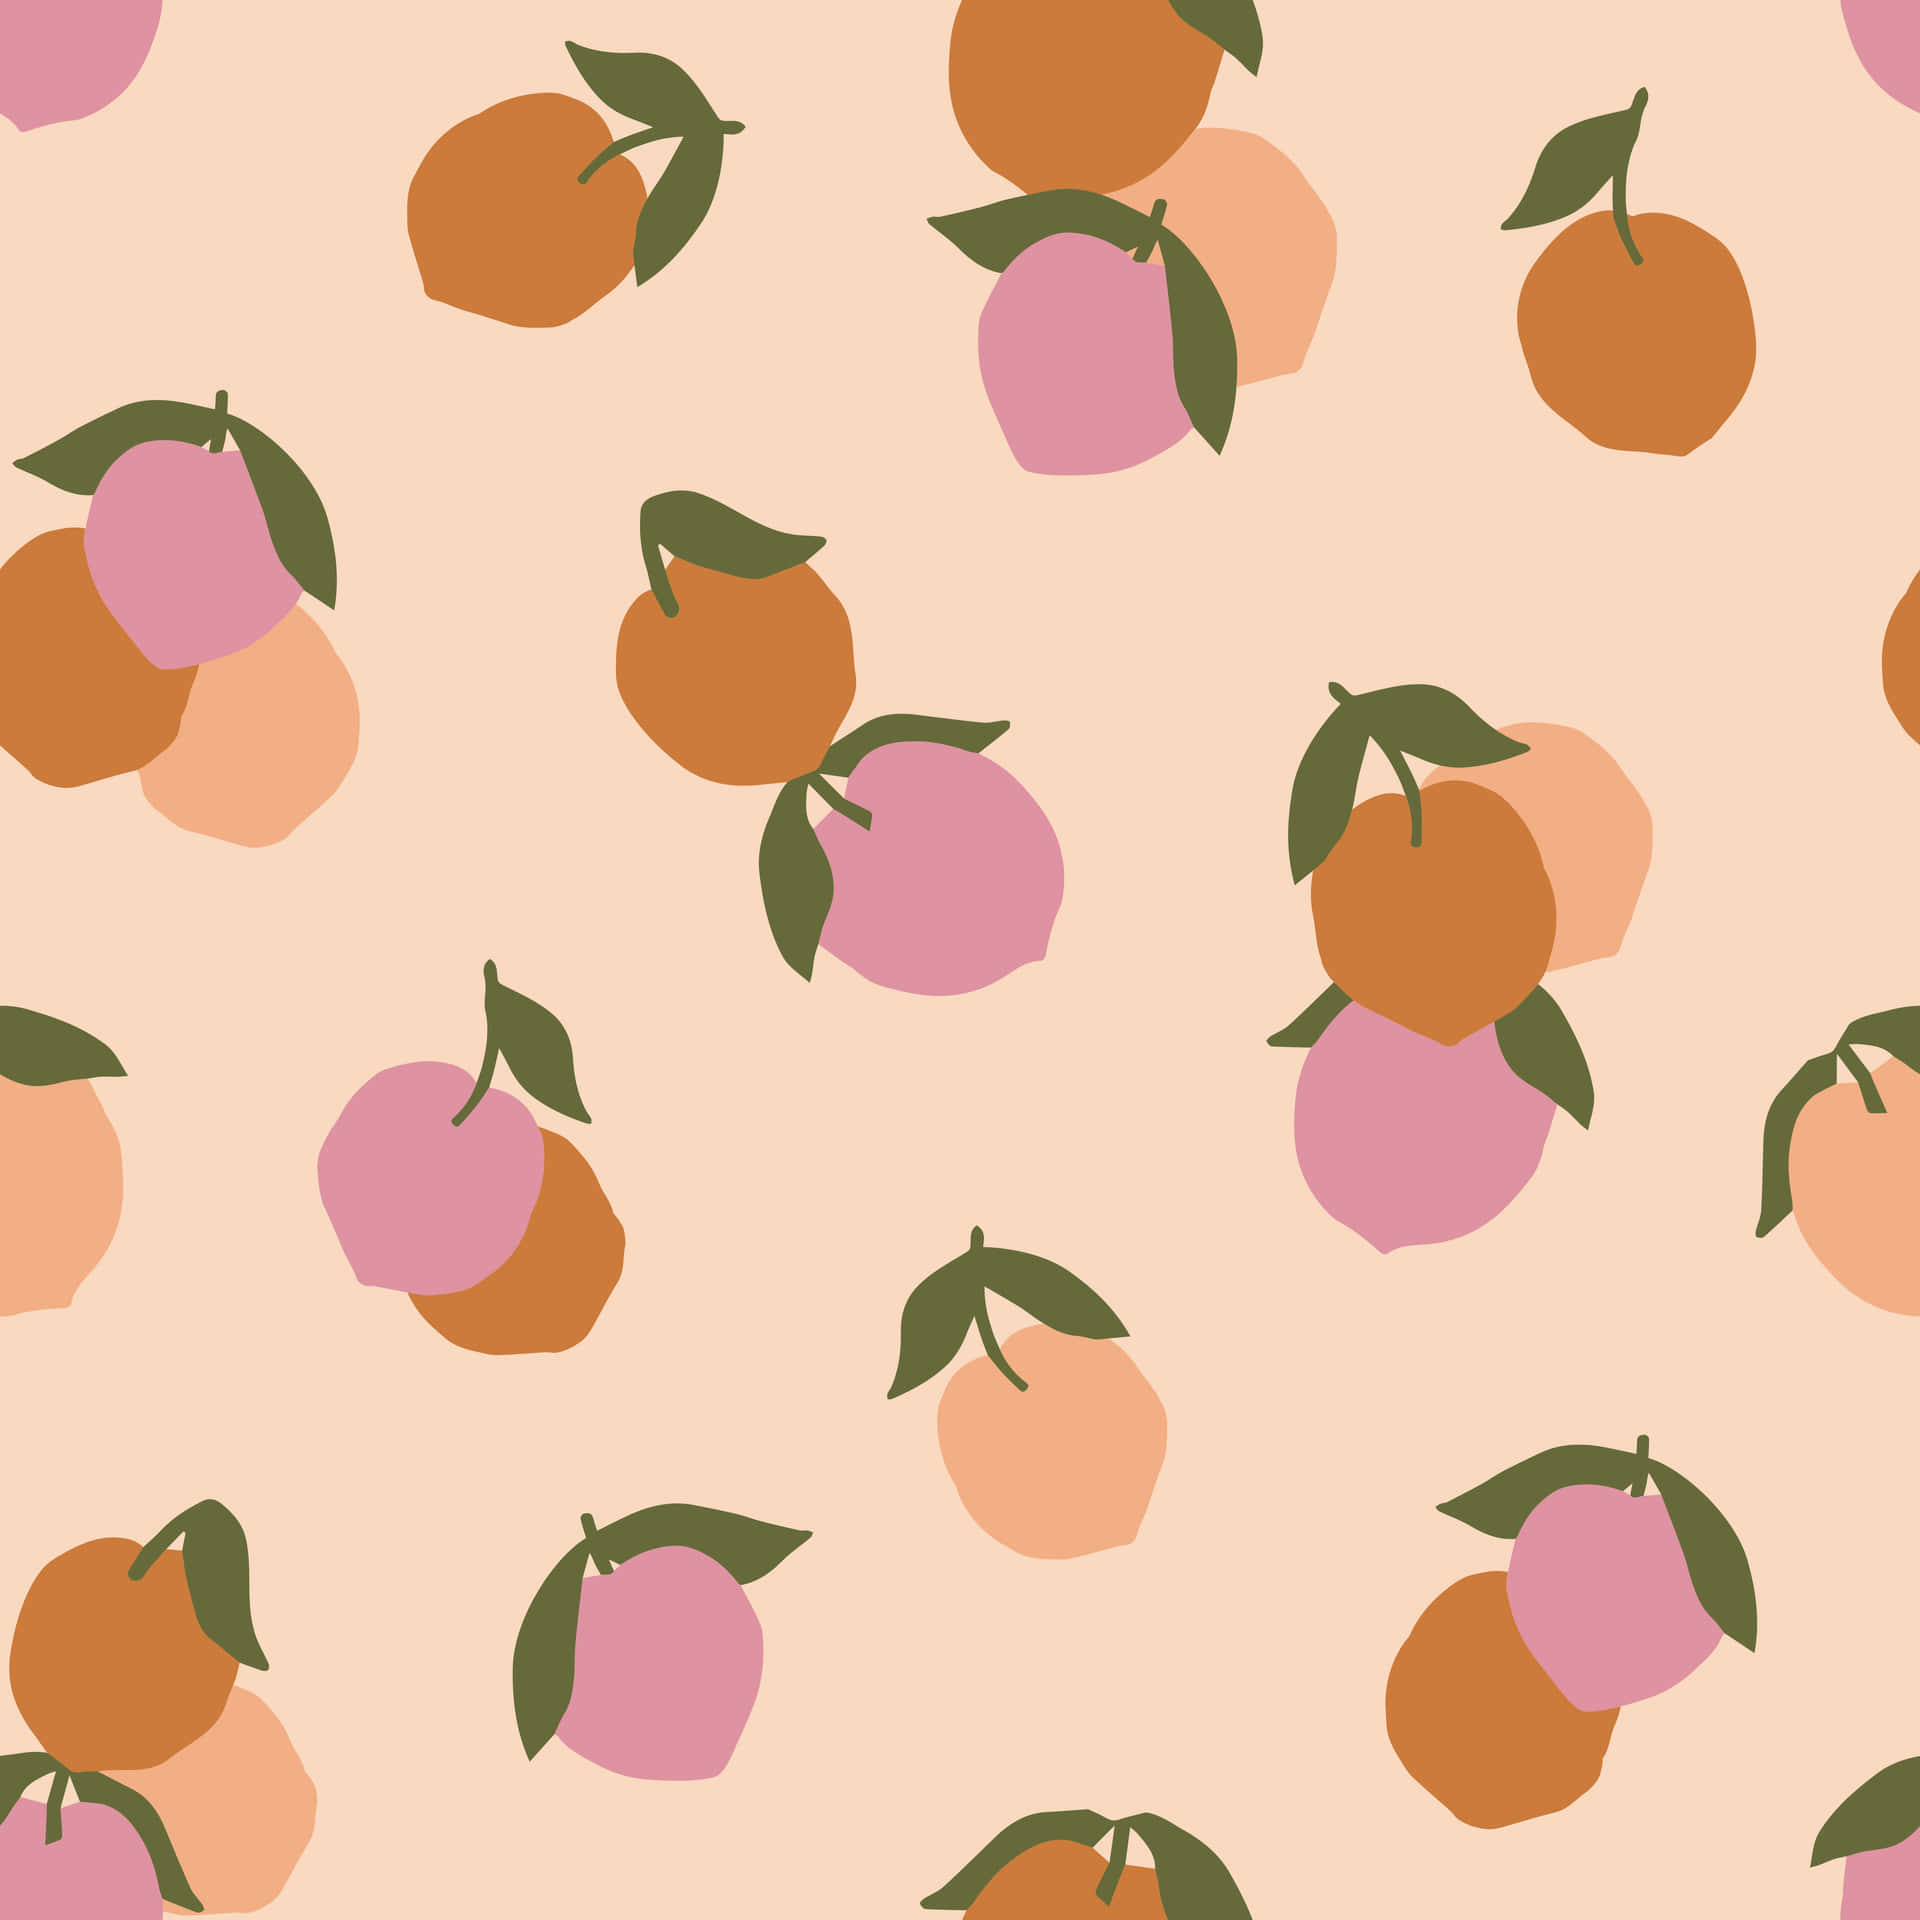 A sweet and cute peach ready to be picked! Wallpaper